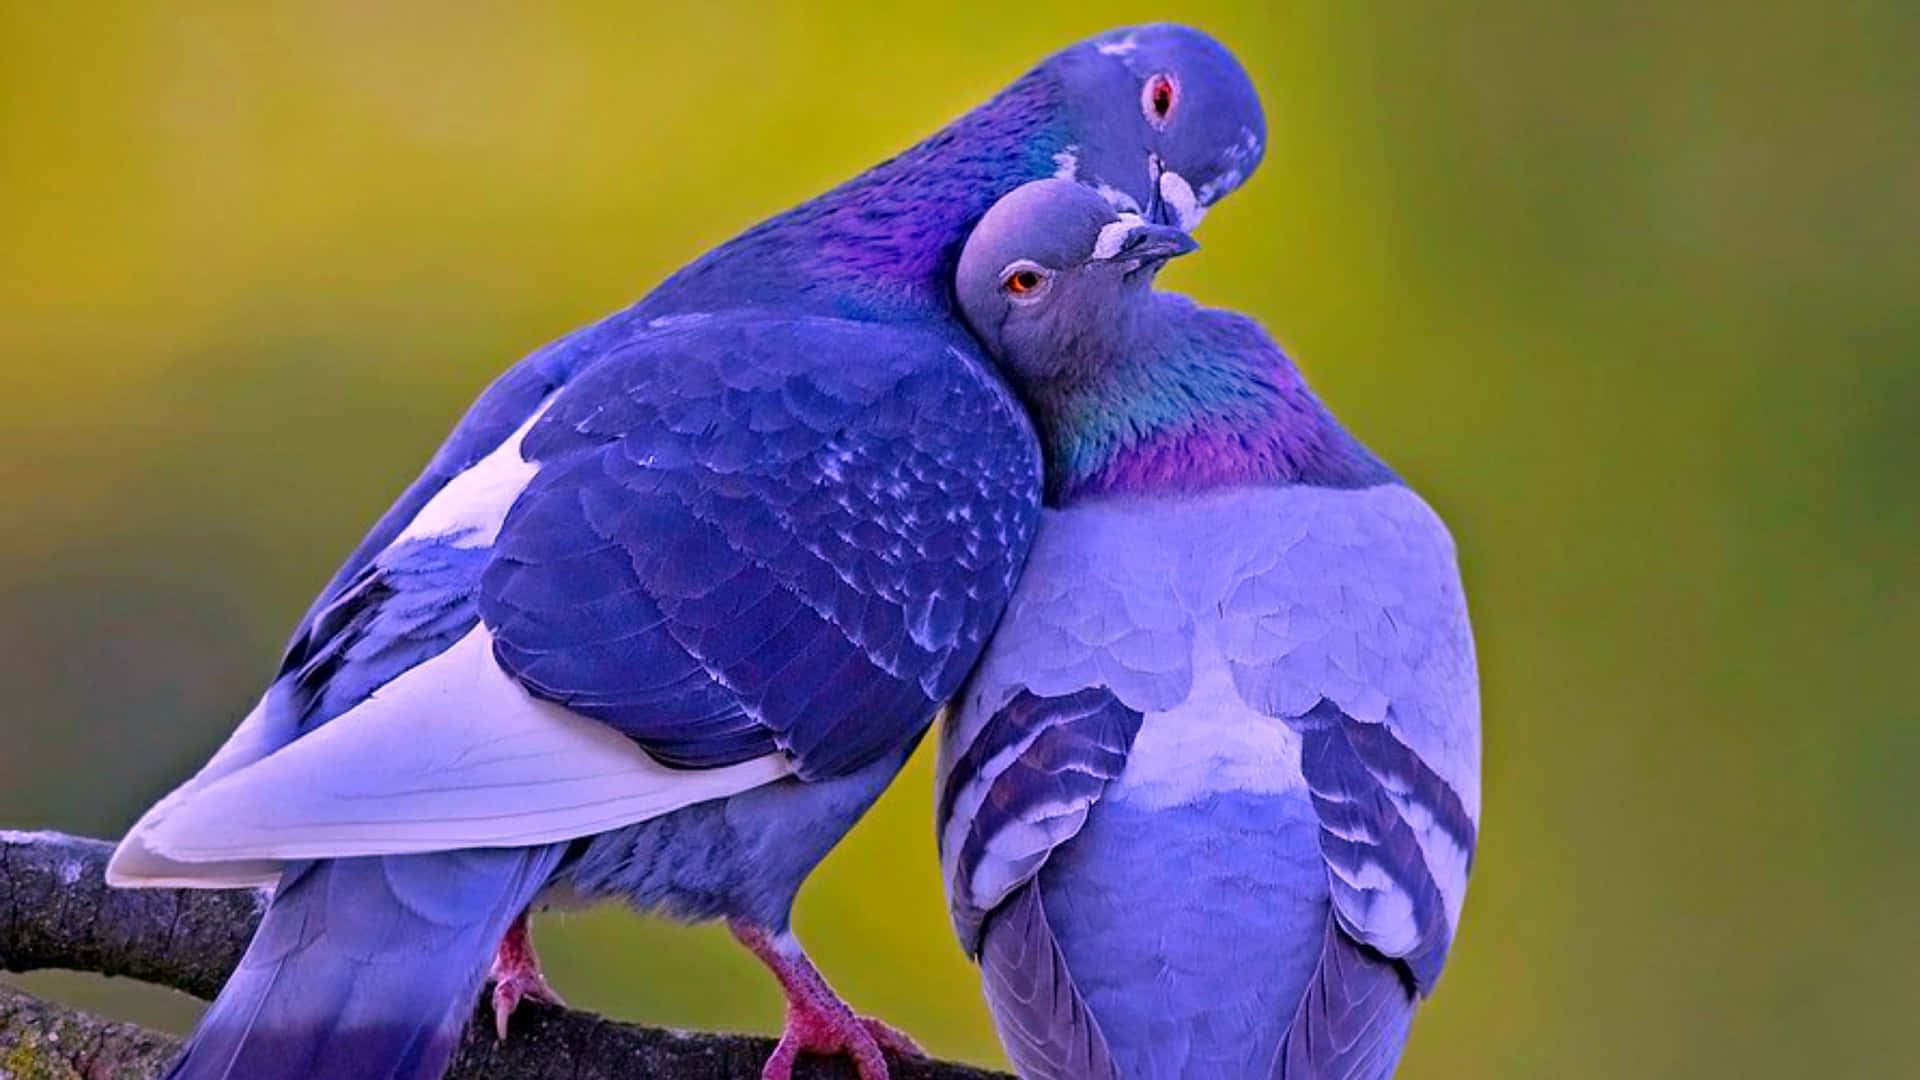 Two Pigeon Lovebirds On Branch Picture